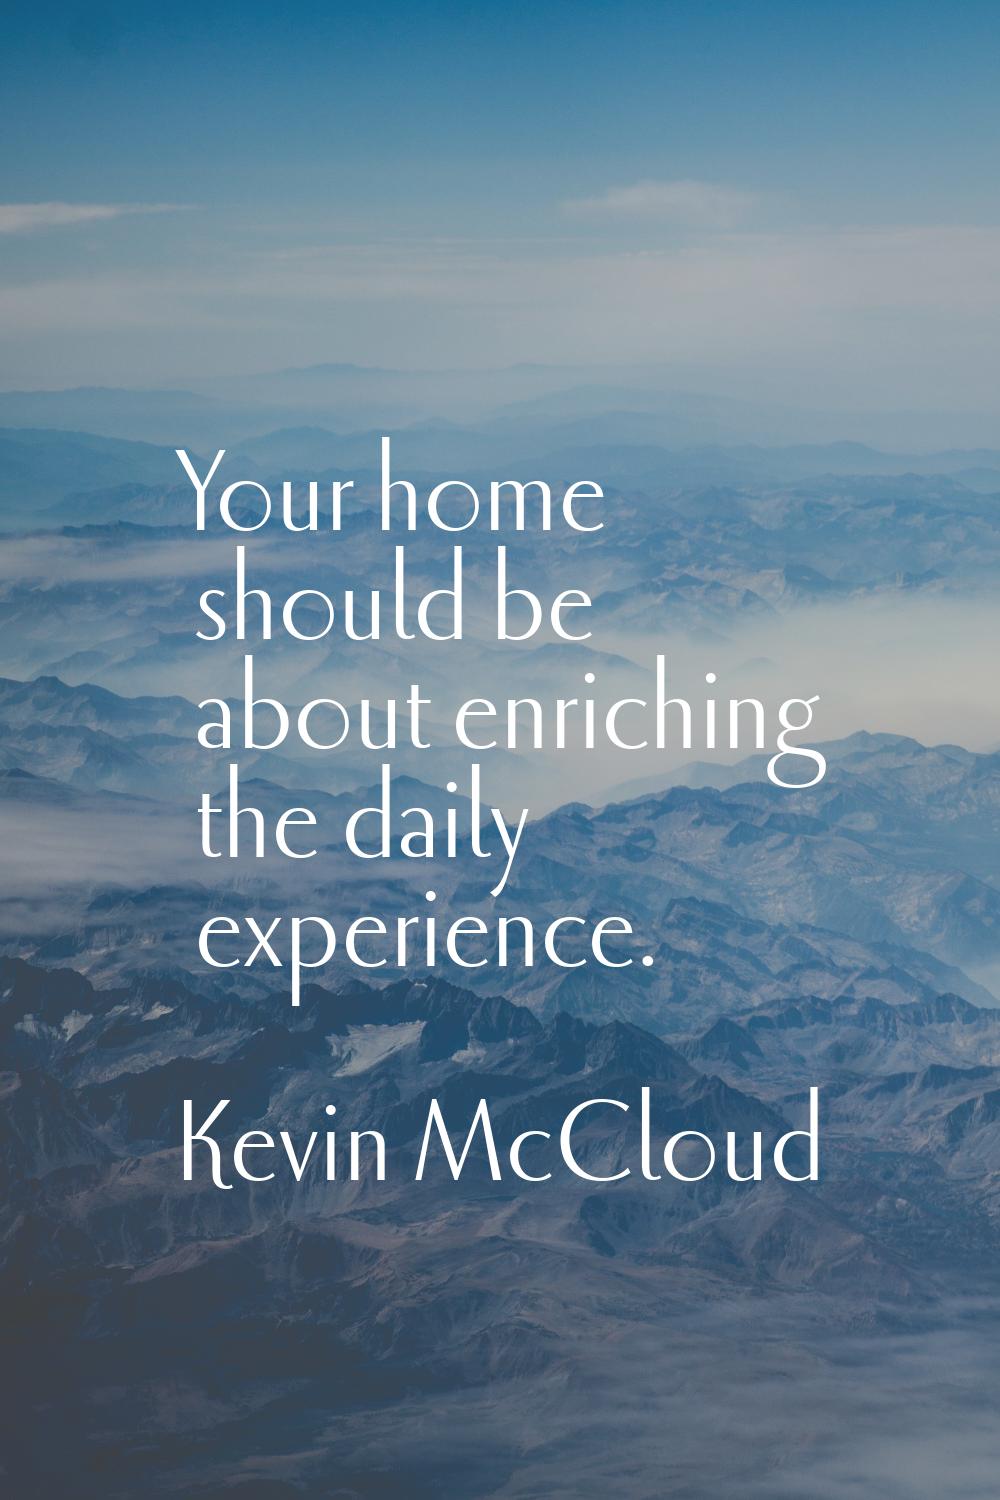 Your home should be about enriching the daily experience.